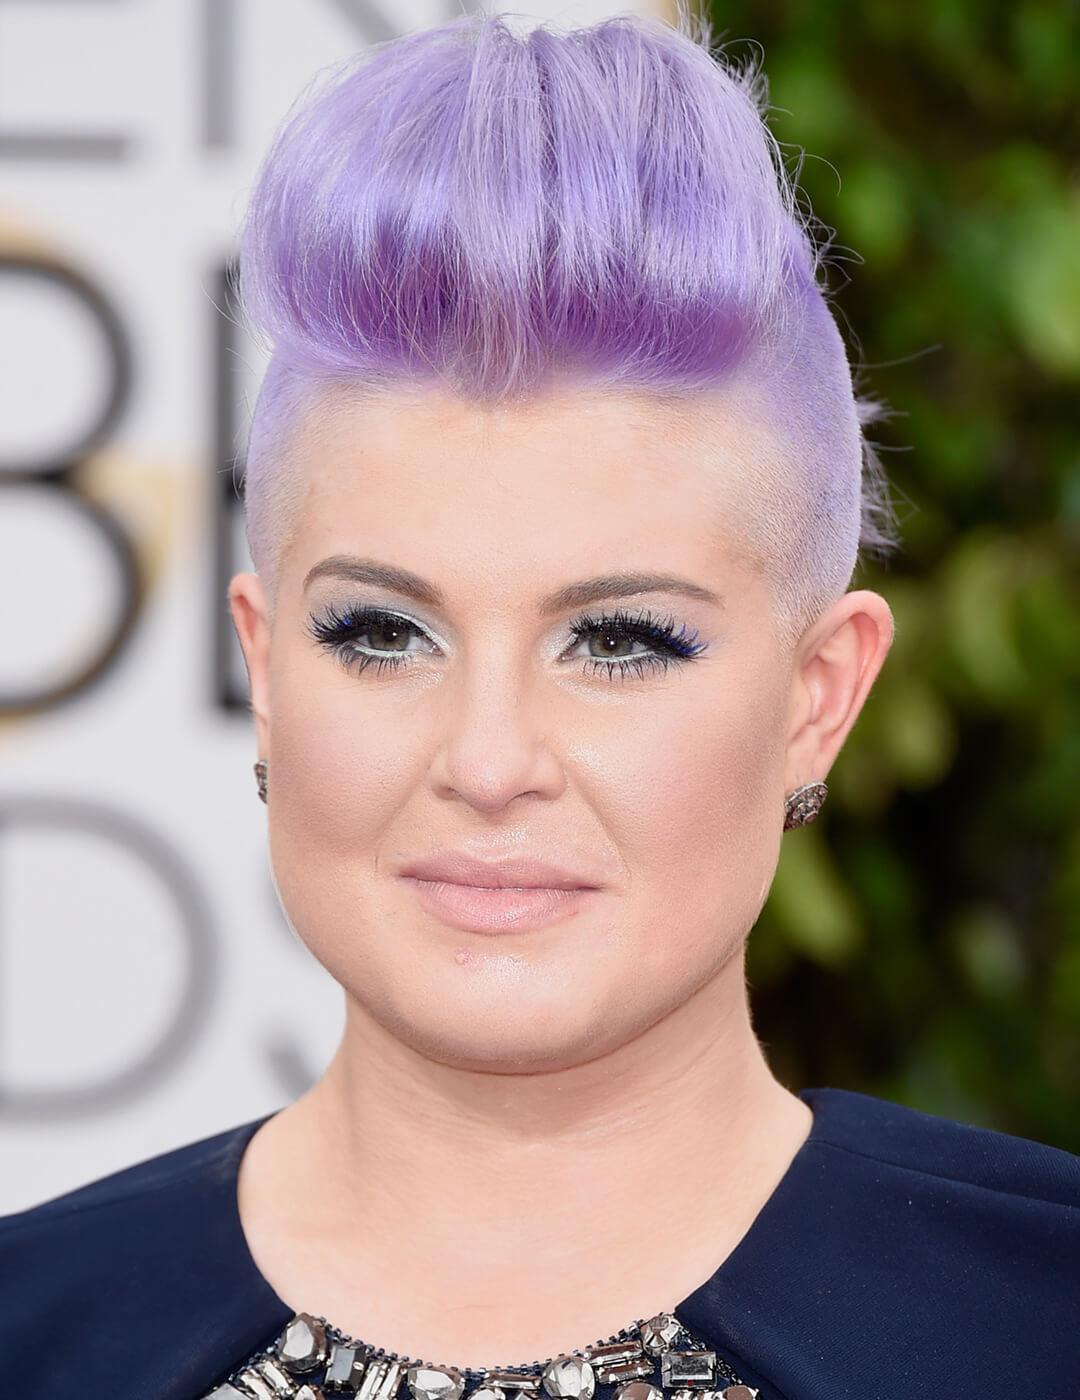 Kelly Osbourne rocking a lavender-colored undercut updo hairstyle, lavender eyeshadow makeup look, and nude lips